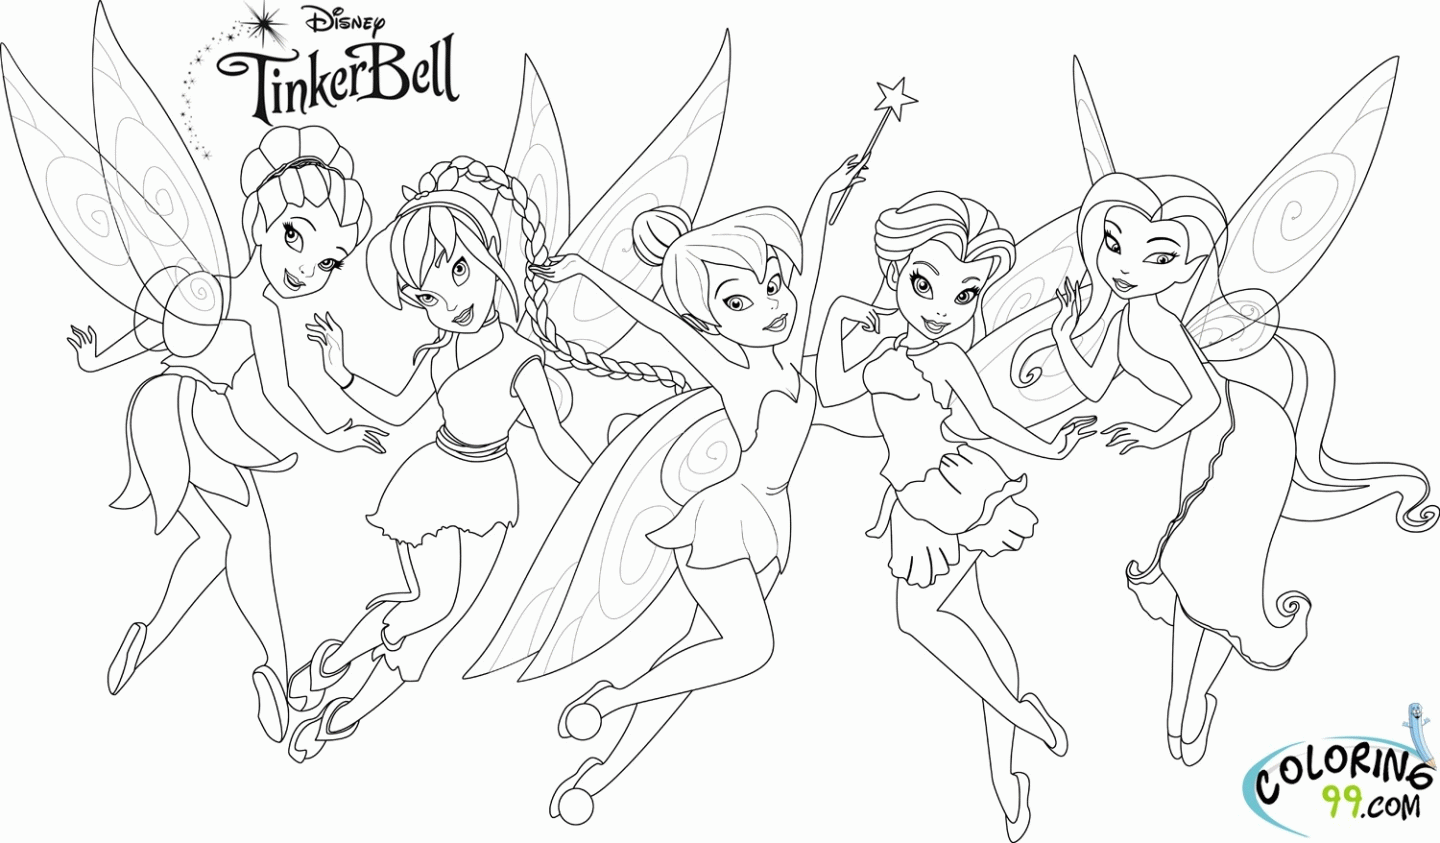 Free Tinkerbell And Periwinkle Coloring Pages, Download Free Tinkerbell